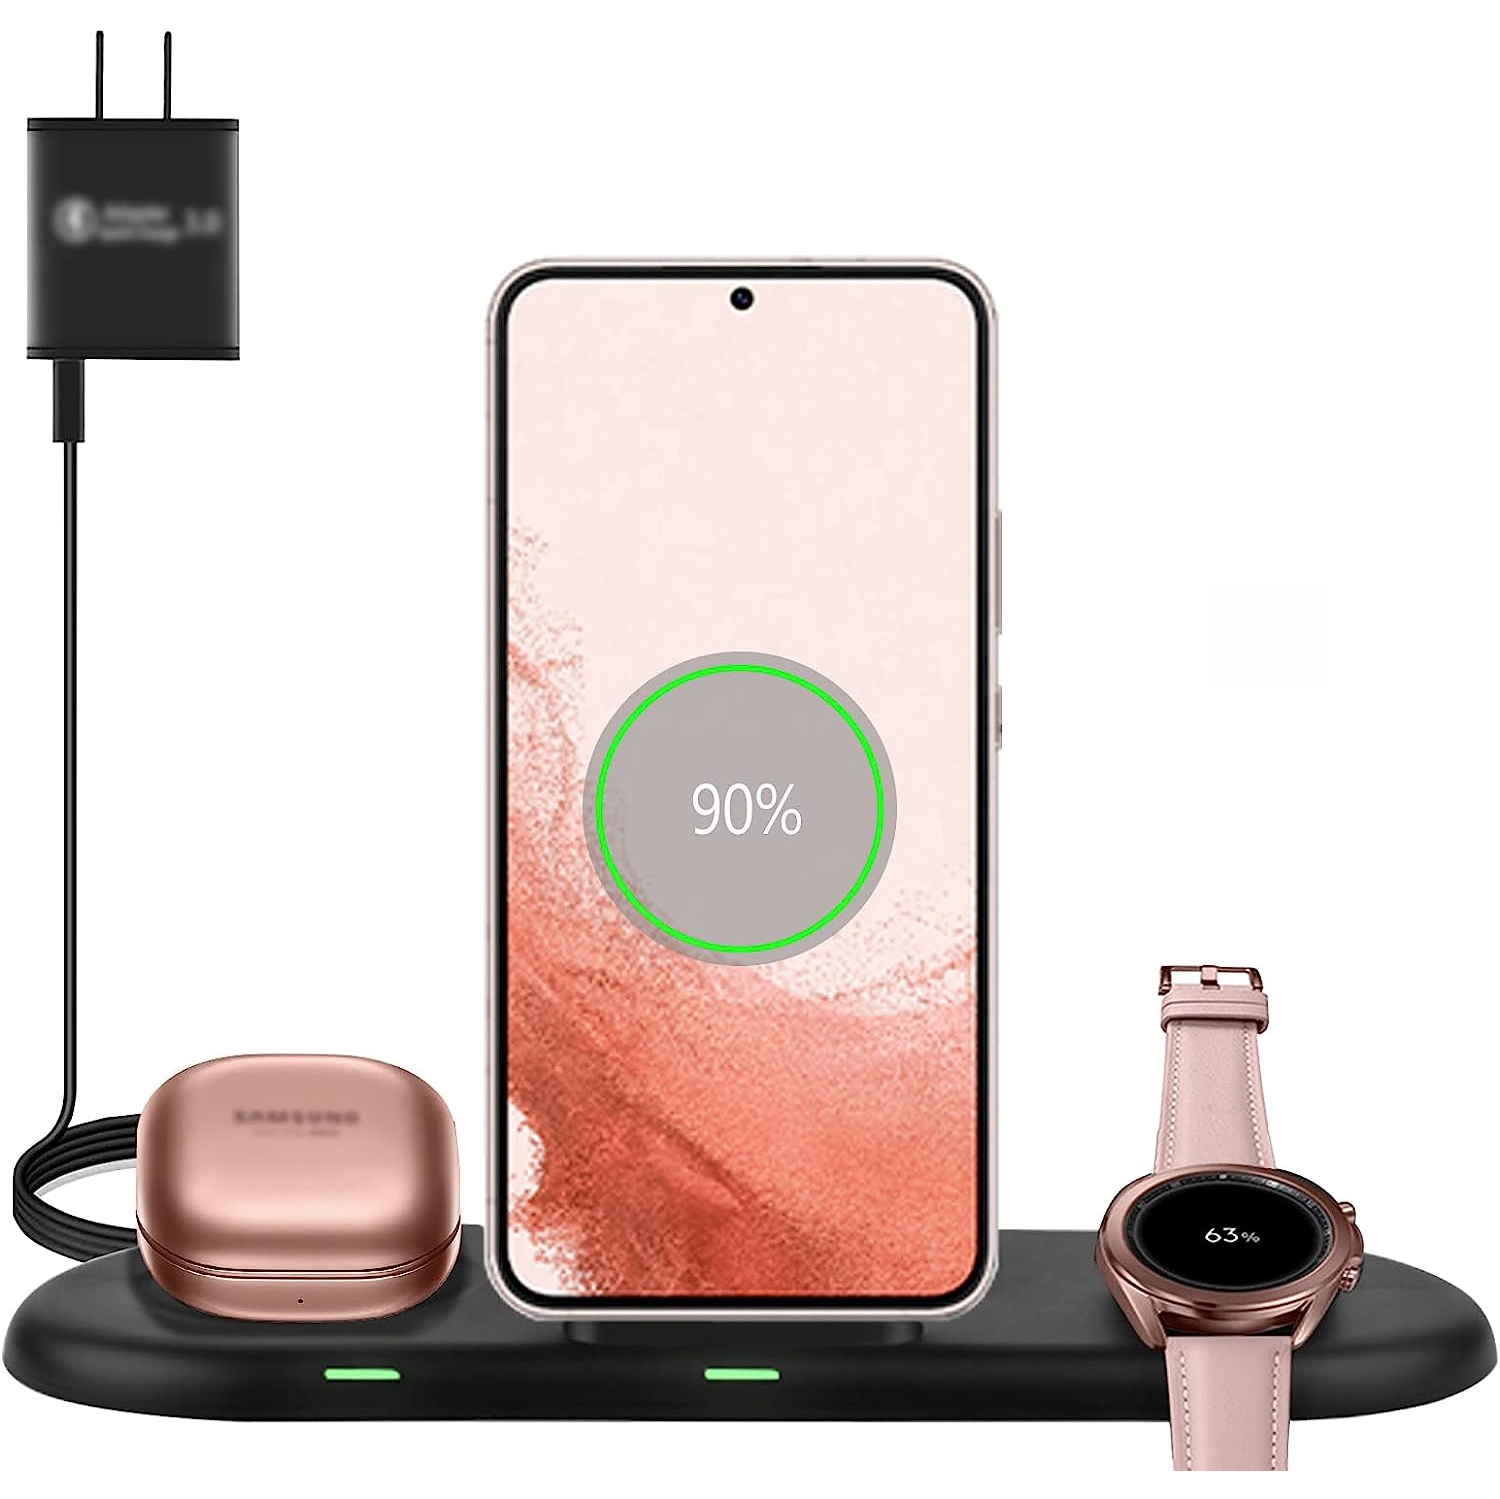 HLD 3-in-1 Fast Wireless Charging Stand Dock for Samsung Galaxy Watch 4, Active 2 Series, Galaxy Buds Series, & Samsung Galaxy S21 S10 Note